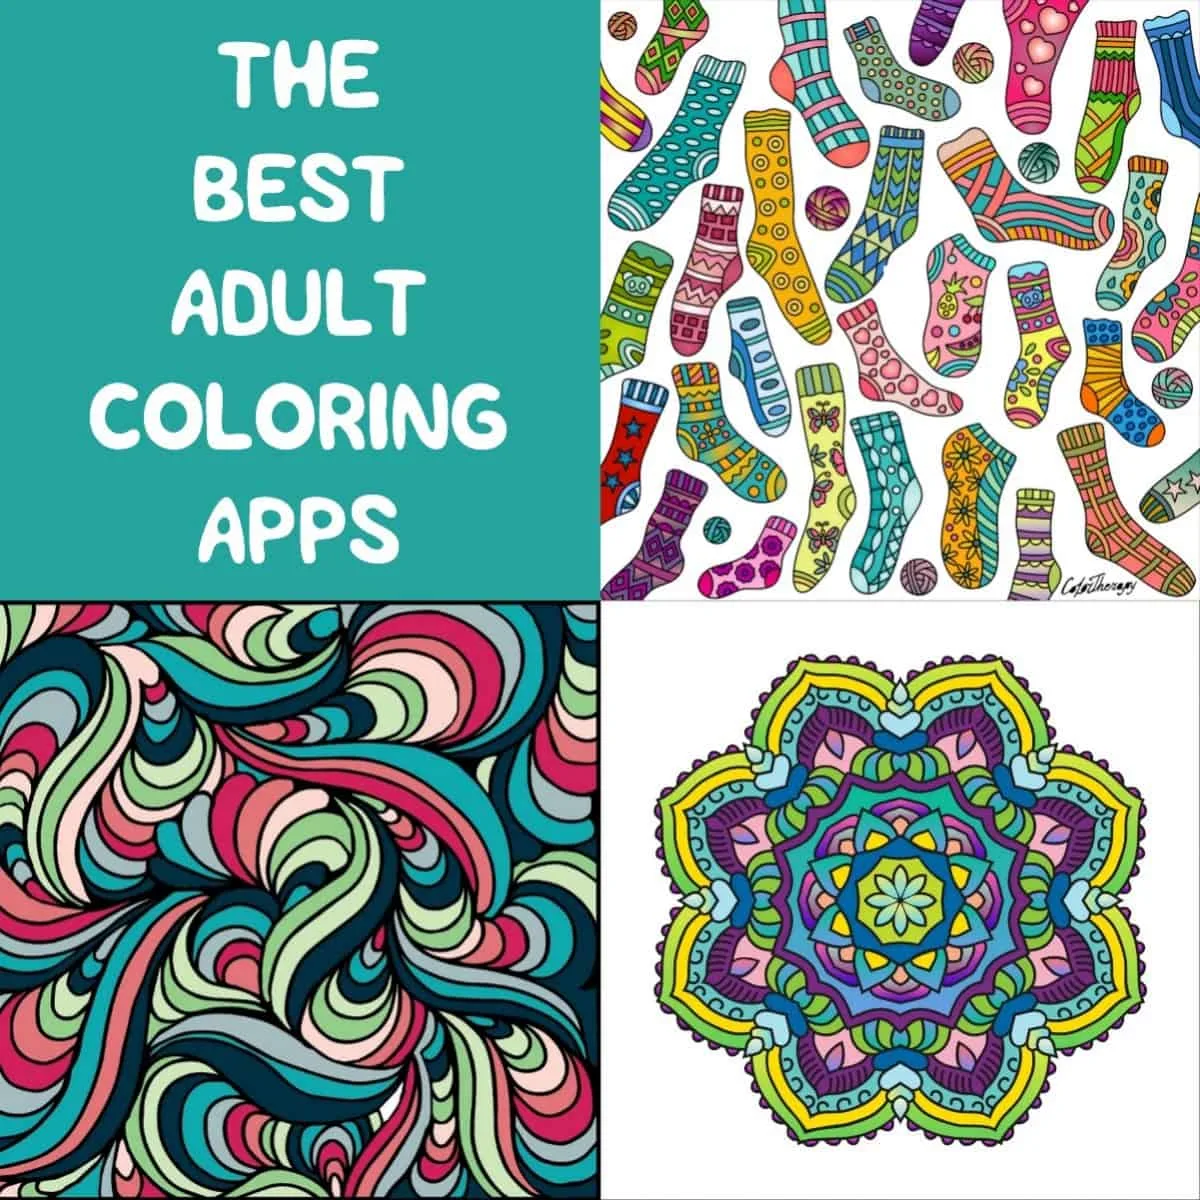 Best Pens for Colouring in Adult Coloring Books and Coloring Pages